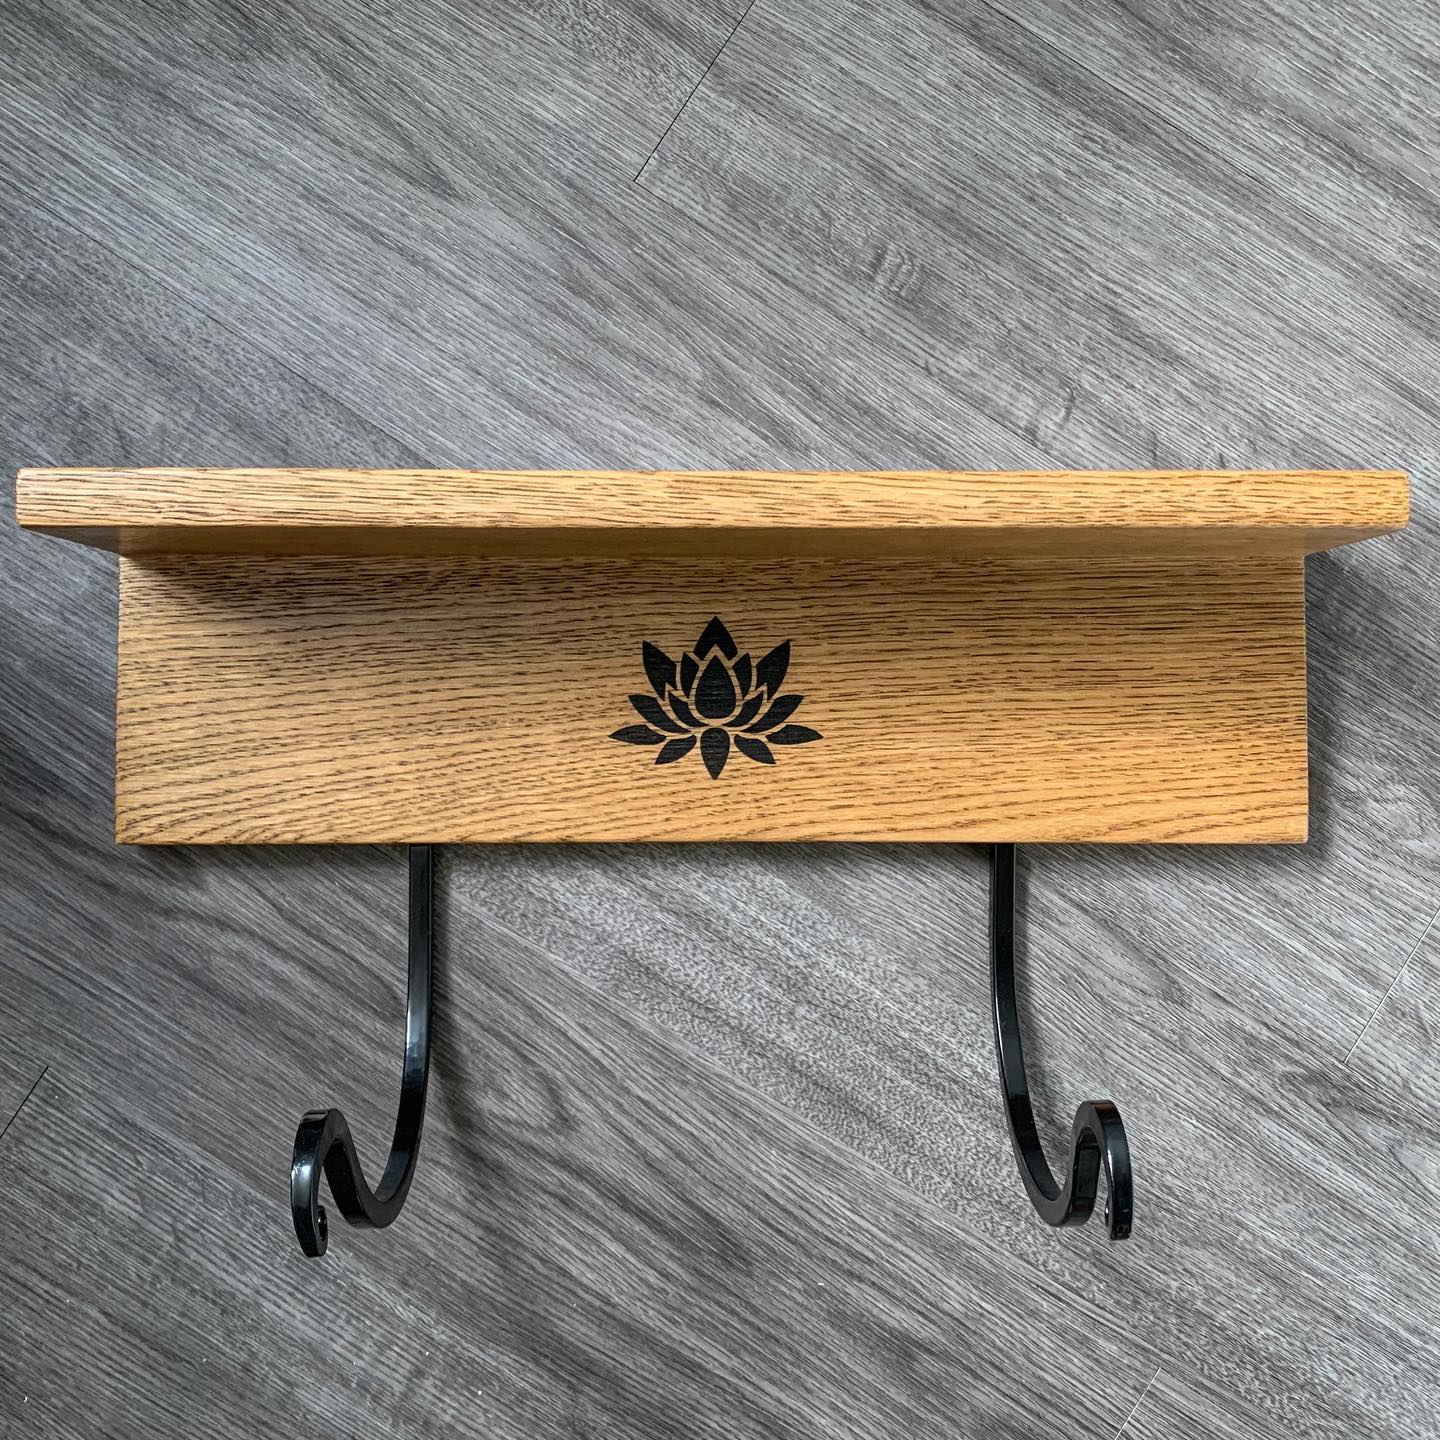 Today’s delivery is this customised yoga mat holder. We love an excuse to use our laser engraver! ....#yoga #functionandform #virtualcraftandflea #decorateyourhome #handcrafted #homewares #madebyus #lotusflower #relax #beyourself